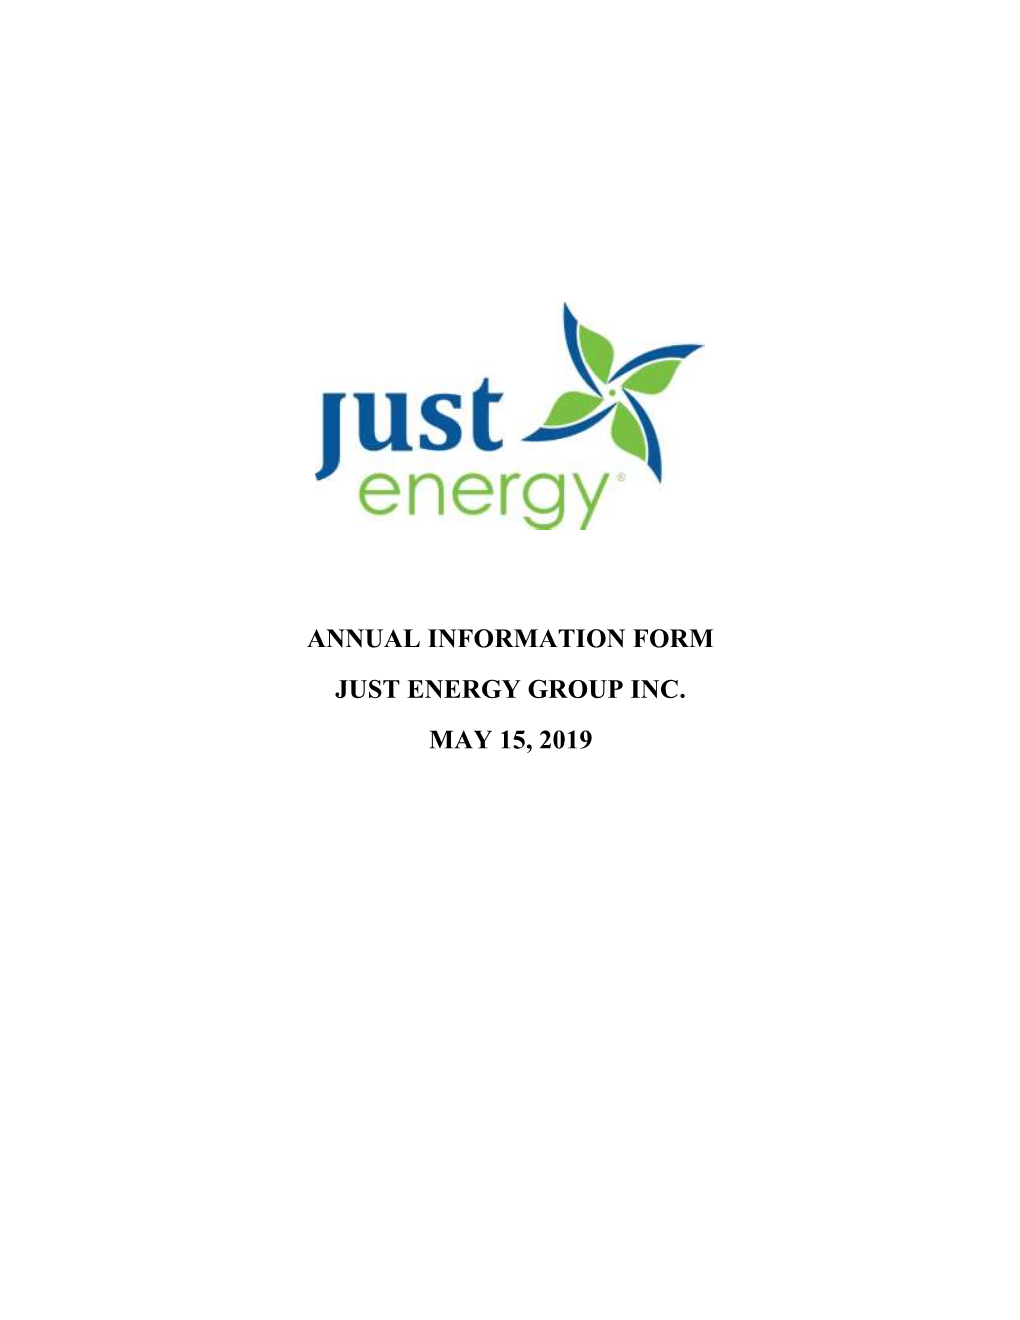 Annual Information Form Just Energy Group Inc. May 15, 2019